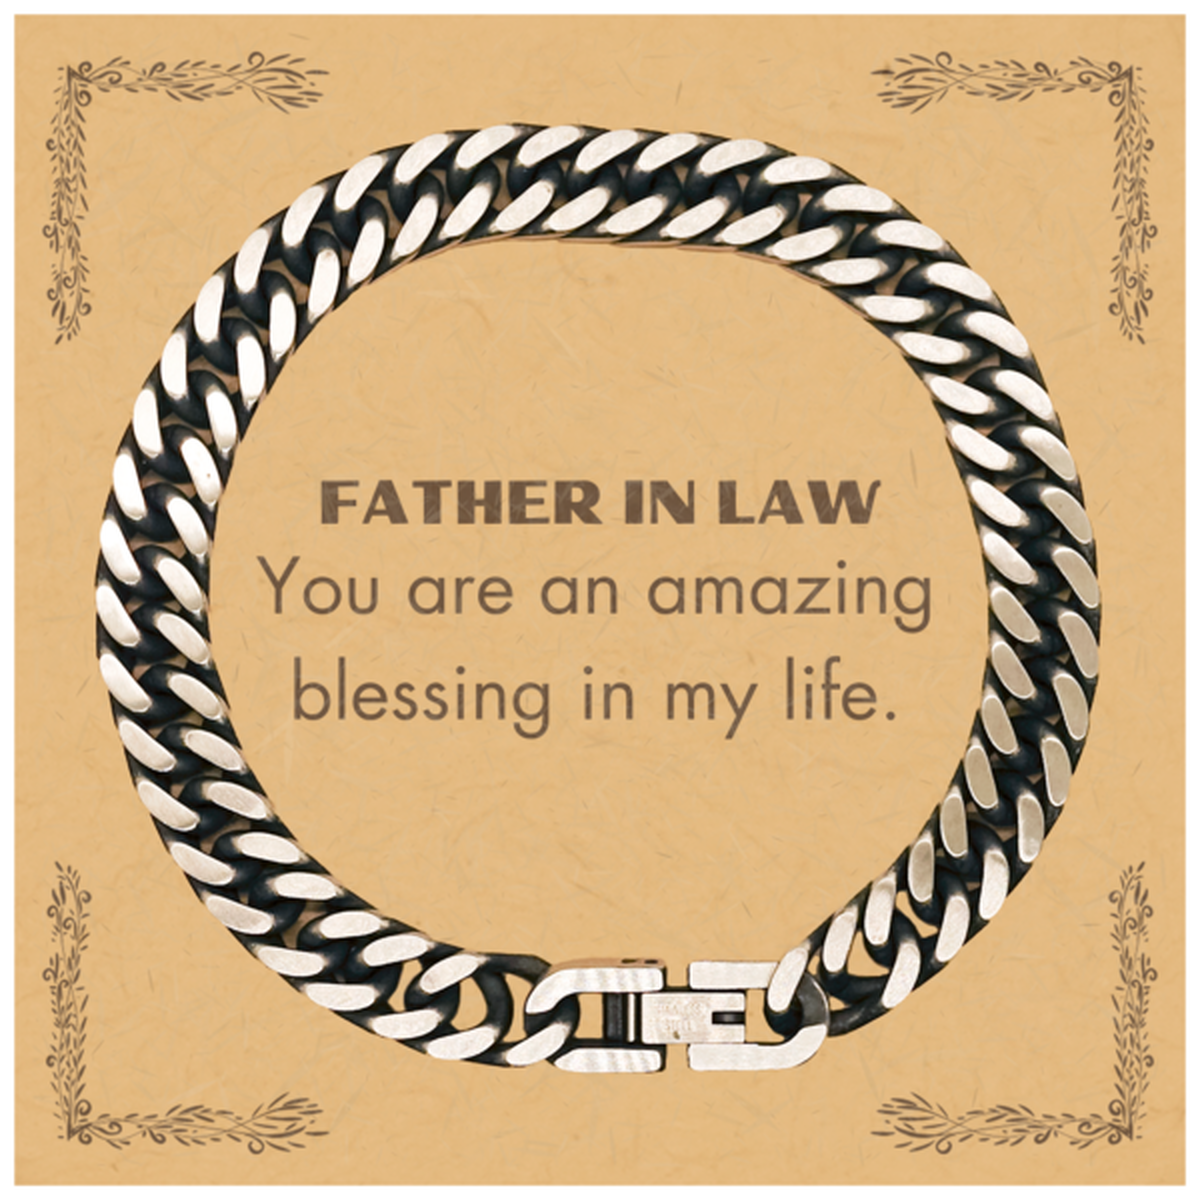 Father In Law Cuban Link Chain Bracelet, You are an amazing blessing in my life, Thank You Gifts For Father In Law, Inspirational Birthday Christmas Unique Gifts For Father In Law